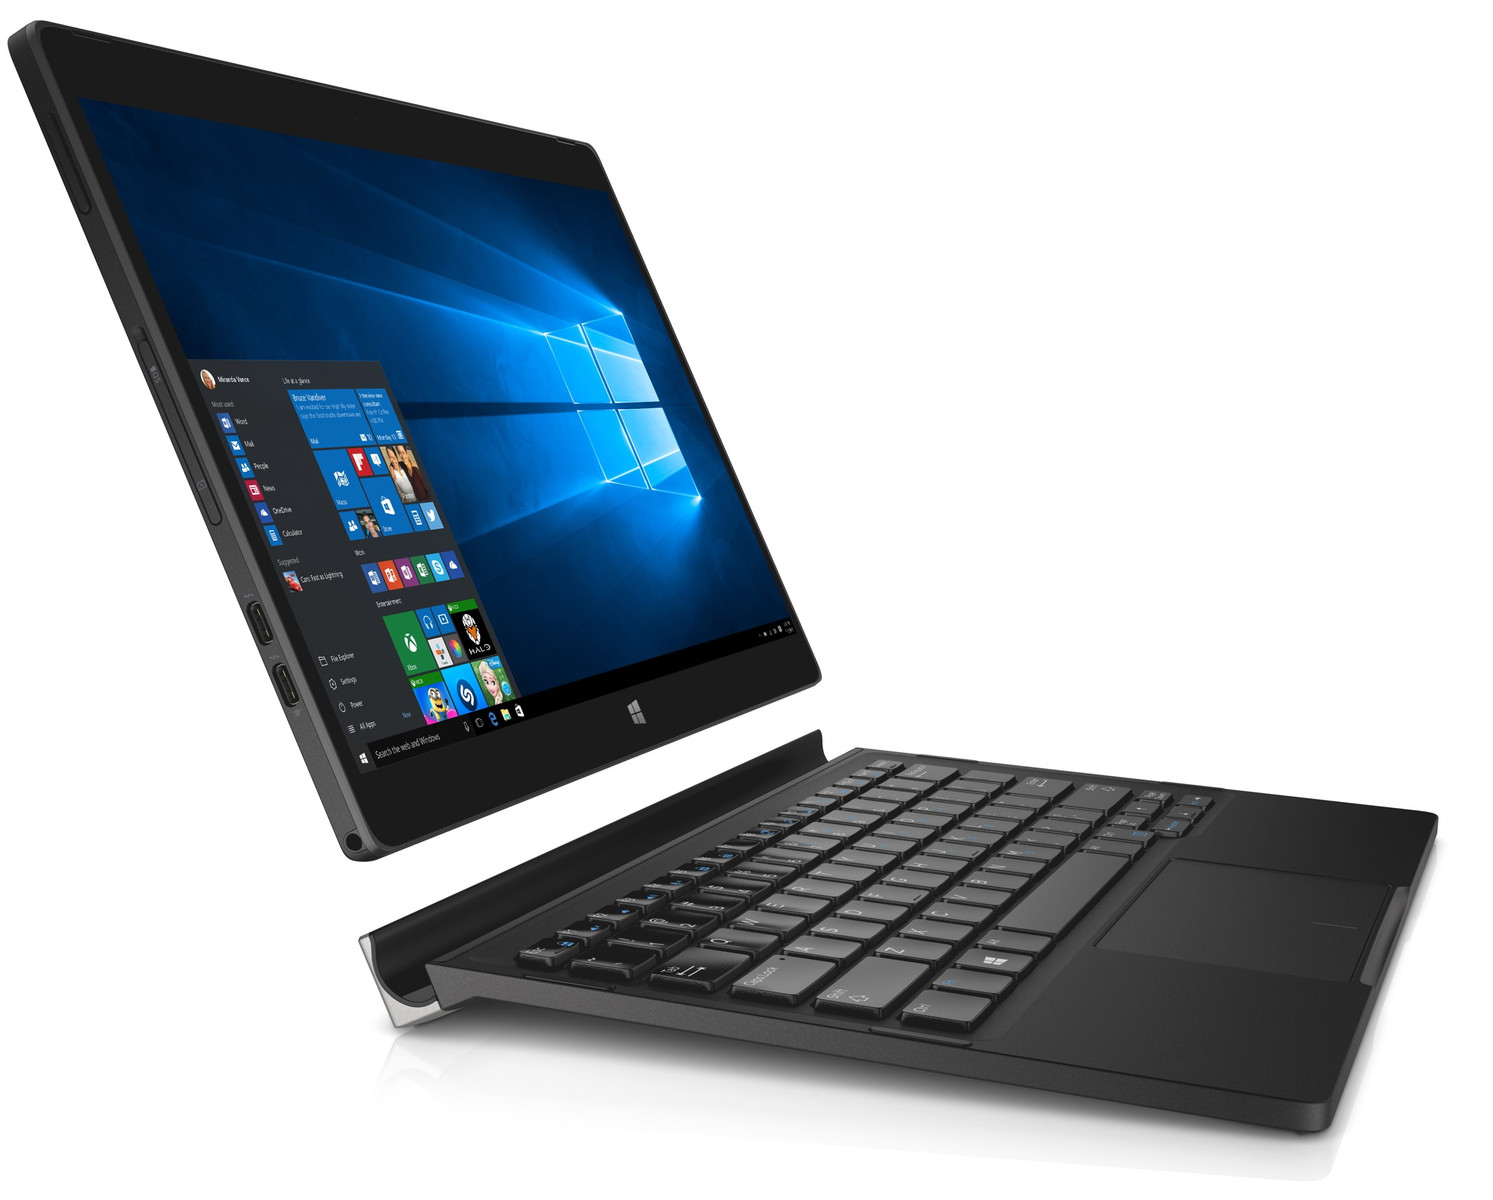 Dell XPS 12 9250 4K Convertible Review - NotebookCheck.net Reviews